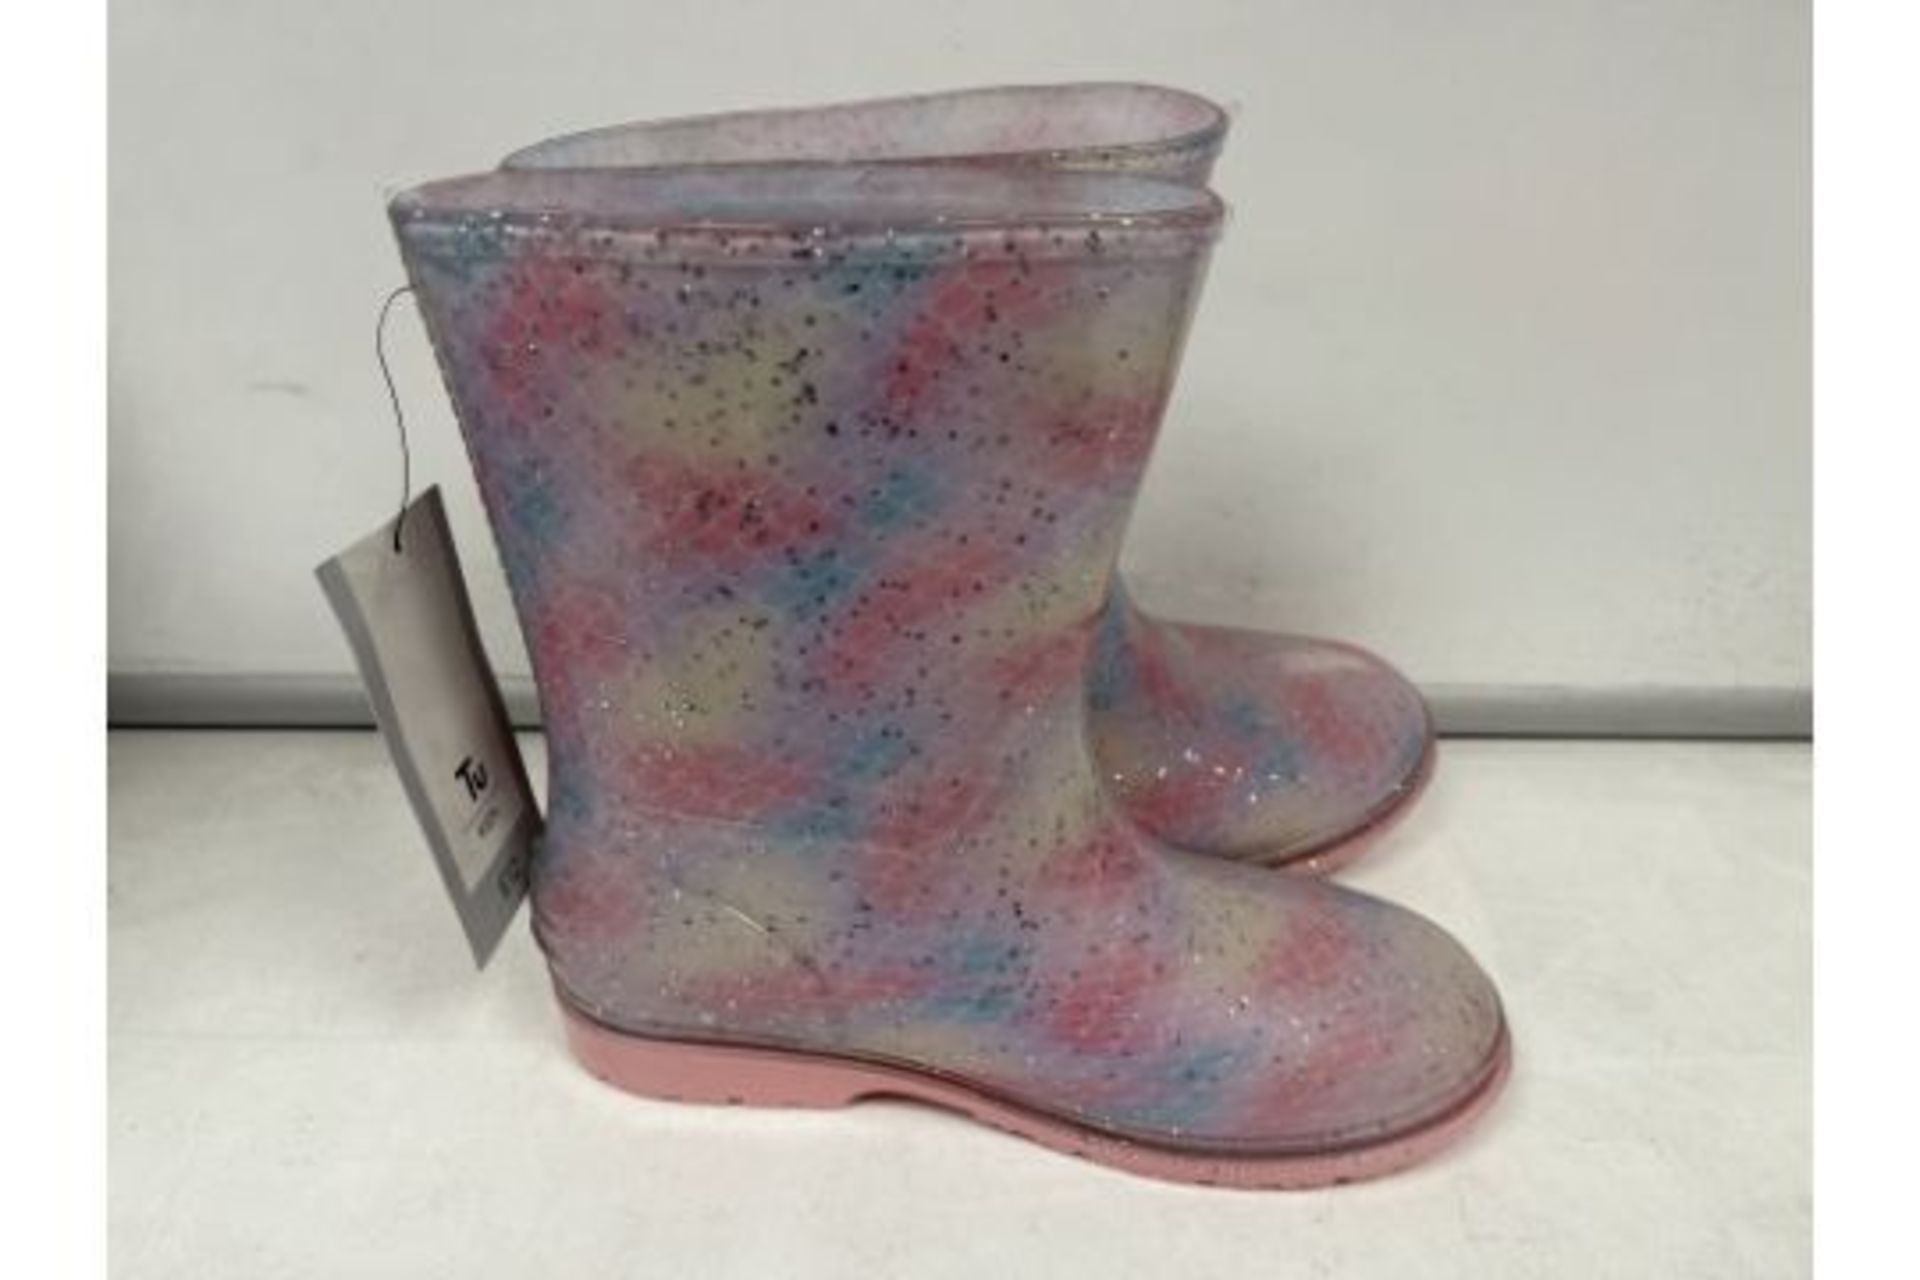 15 X NEW PACKAGED PAIRS OF TU KIDS CHILDRENS GLITTERY WELLIES IN A RATIO PACKED BOX WITH VARIOUS